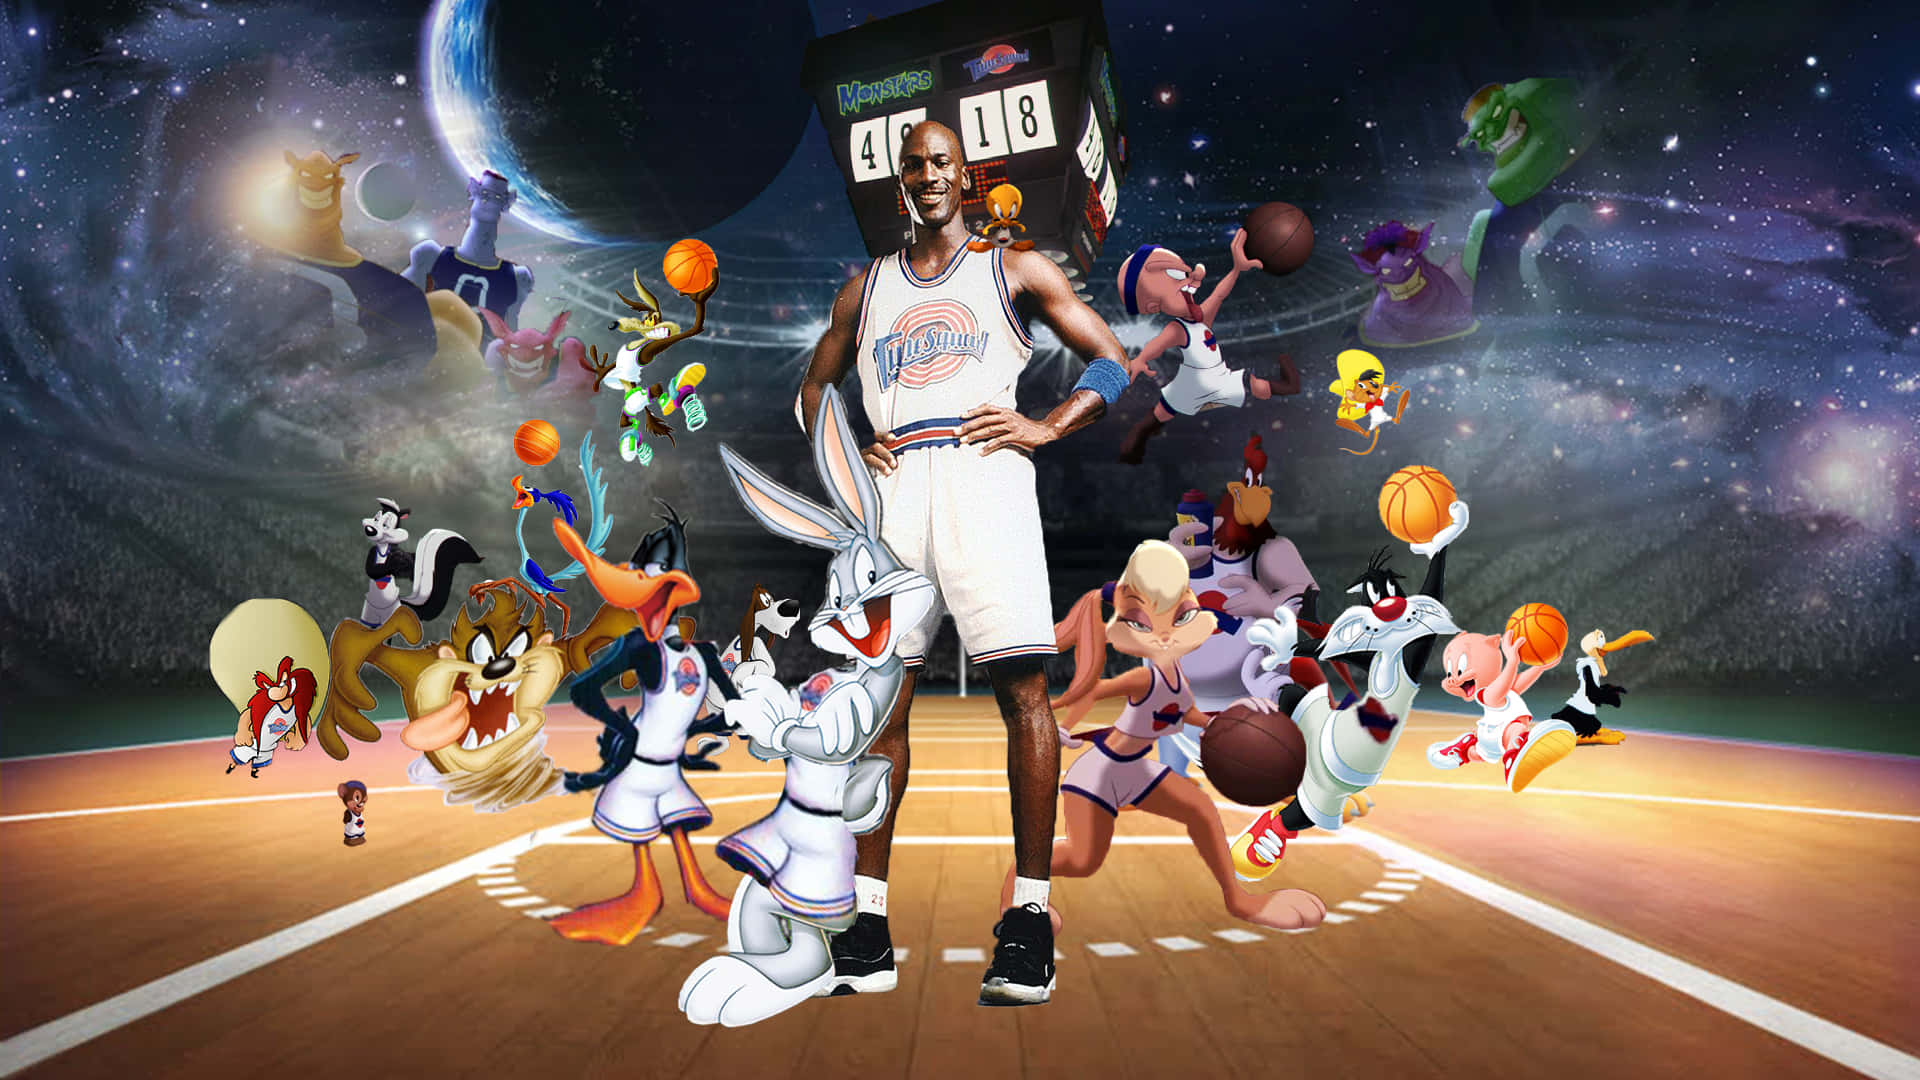 Space Jam Wallpapers  Top 25 Best Space Jam A New Legacy Backgrounds